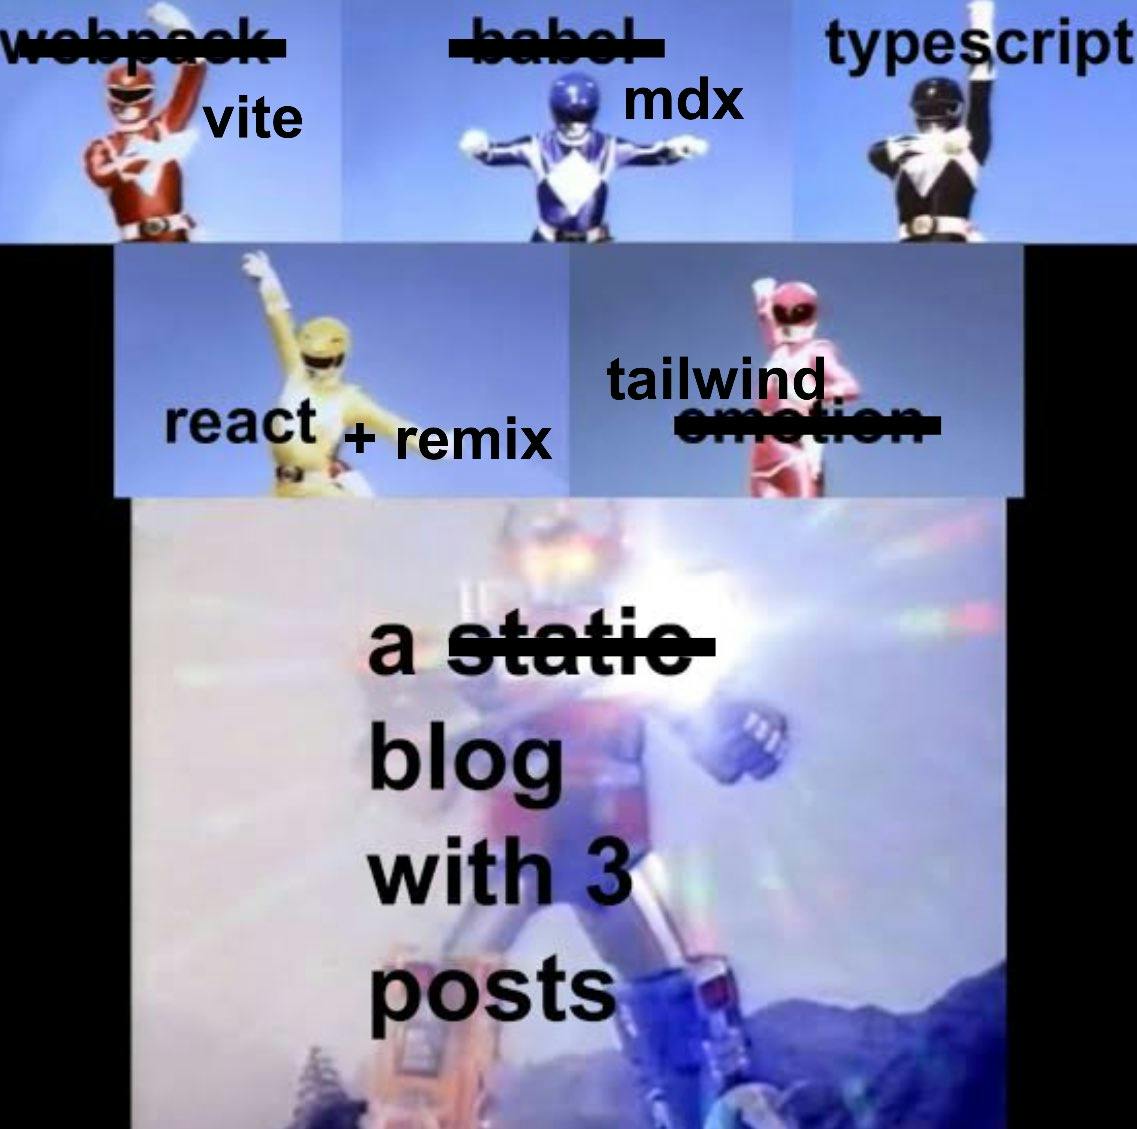 Meme of Power Rangers transforming into the Megazord. Over each of the Power Rangers is listed a technology. First is webpack crossed out and replaced with vite. The second is babel crossed out and replaced with mdx. The third is typescript. The fourth react + remix. The fifth is tailwind with emotion crossed out. Finally the Megazord has "a static blog with 3 posts" but the word "static" is crossed out